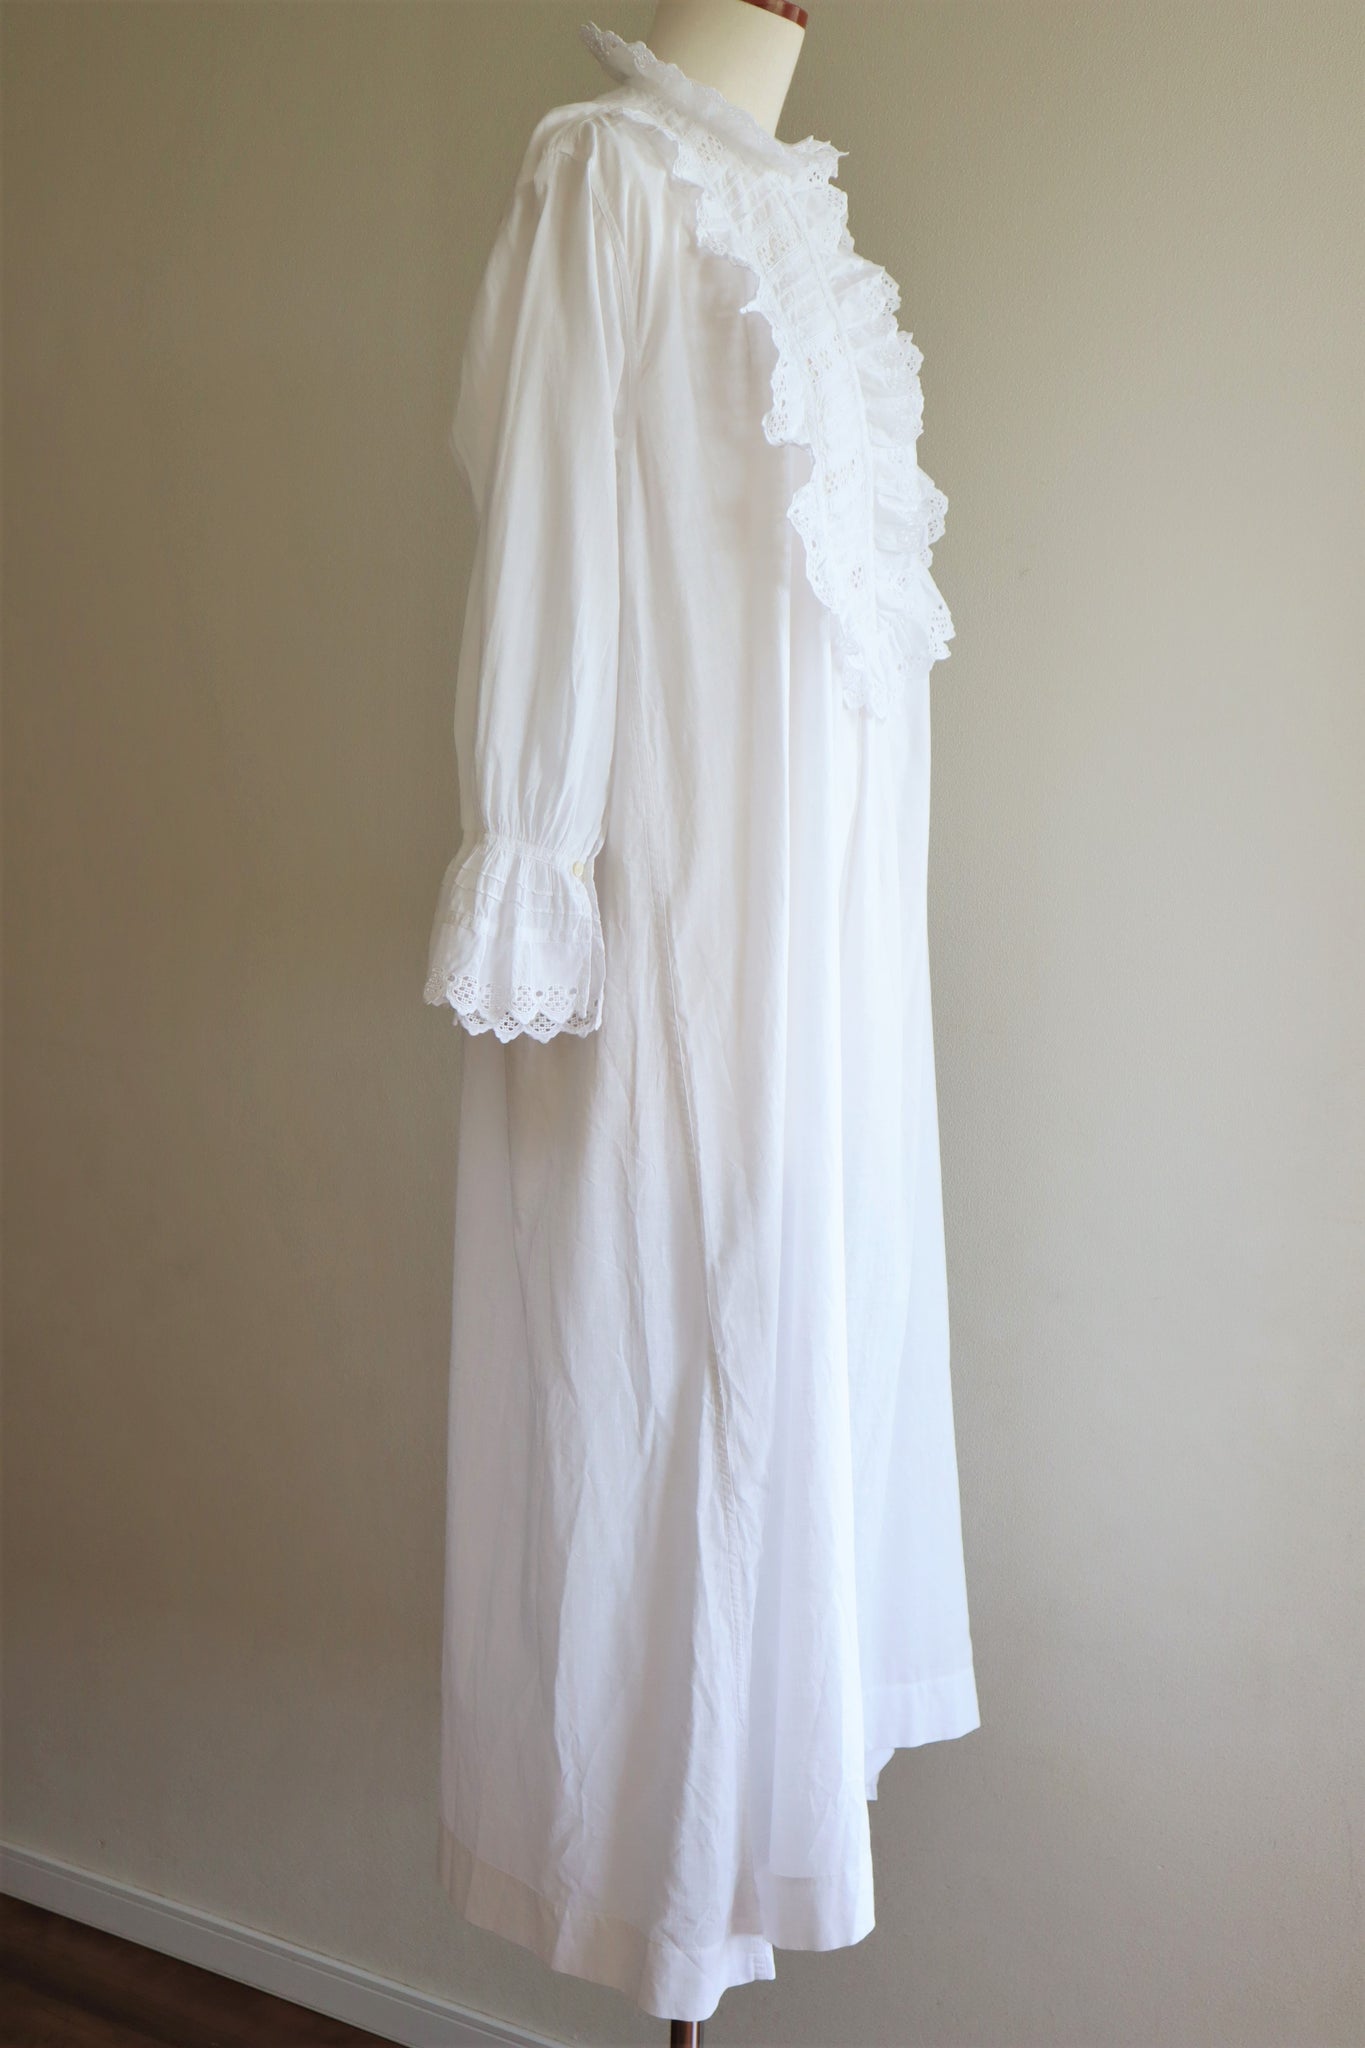 1920s Ruffled Collar Embroidered White Cotton Dress